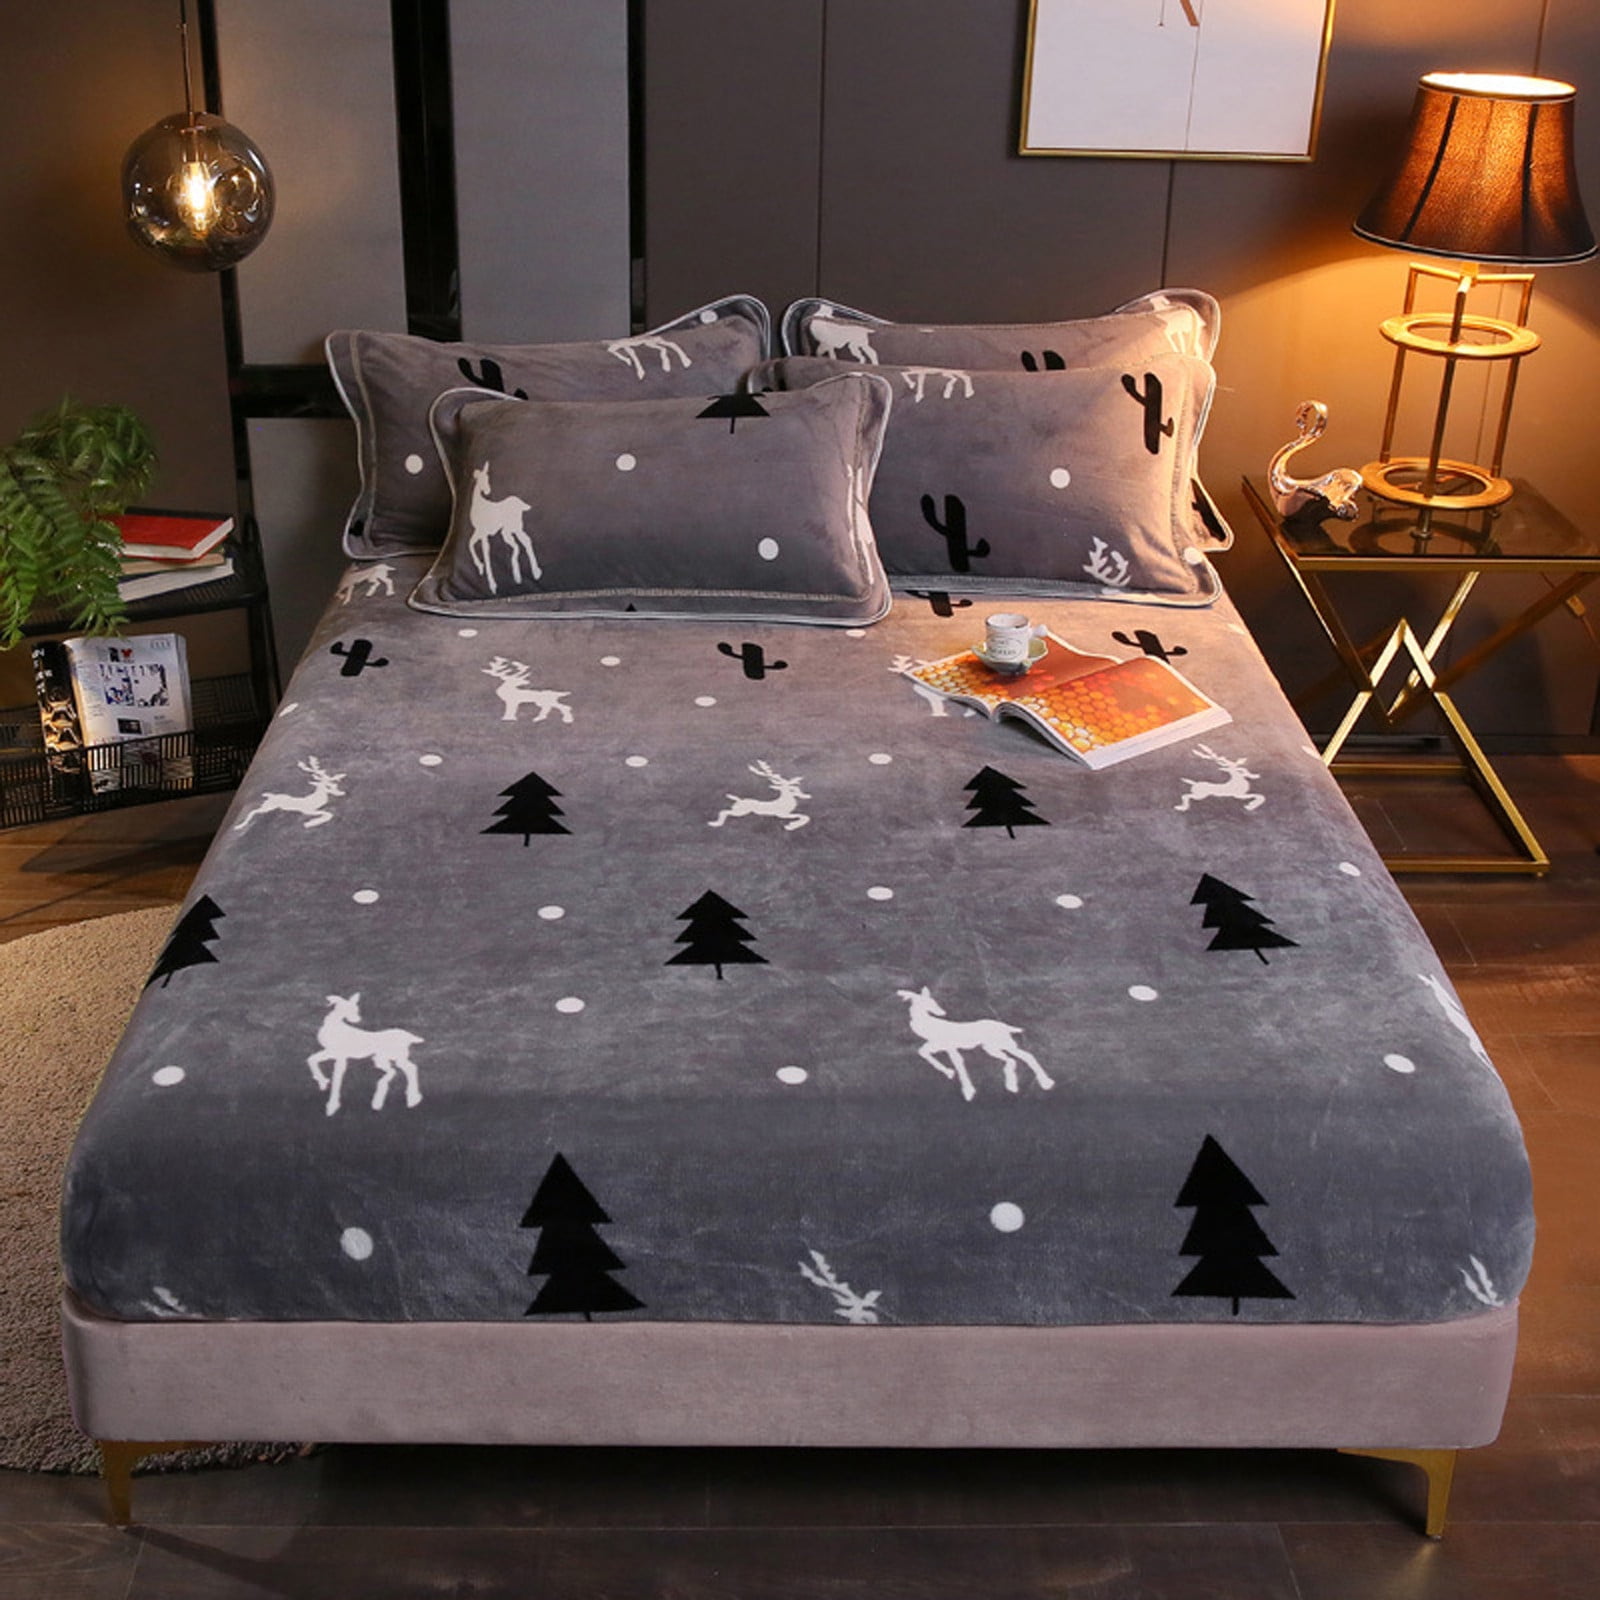 Fitted Sheets Star Foil Teddy Fleece Luxurious Soft Warm Cosy Duvet Cover Sets 